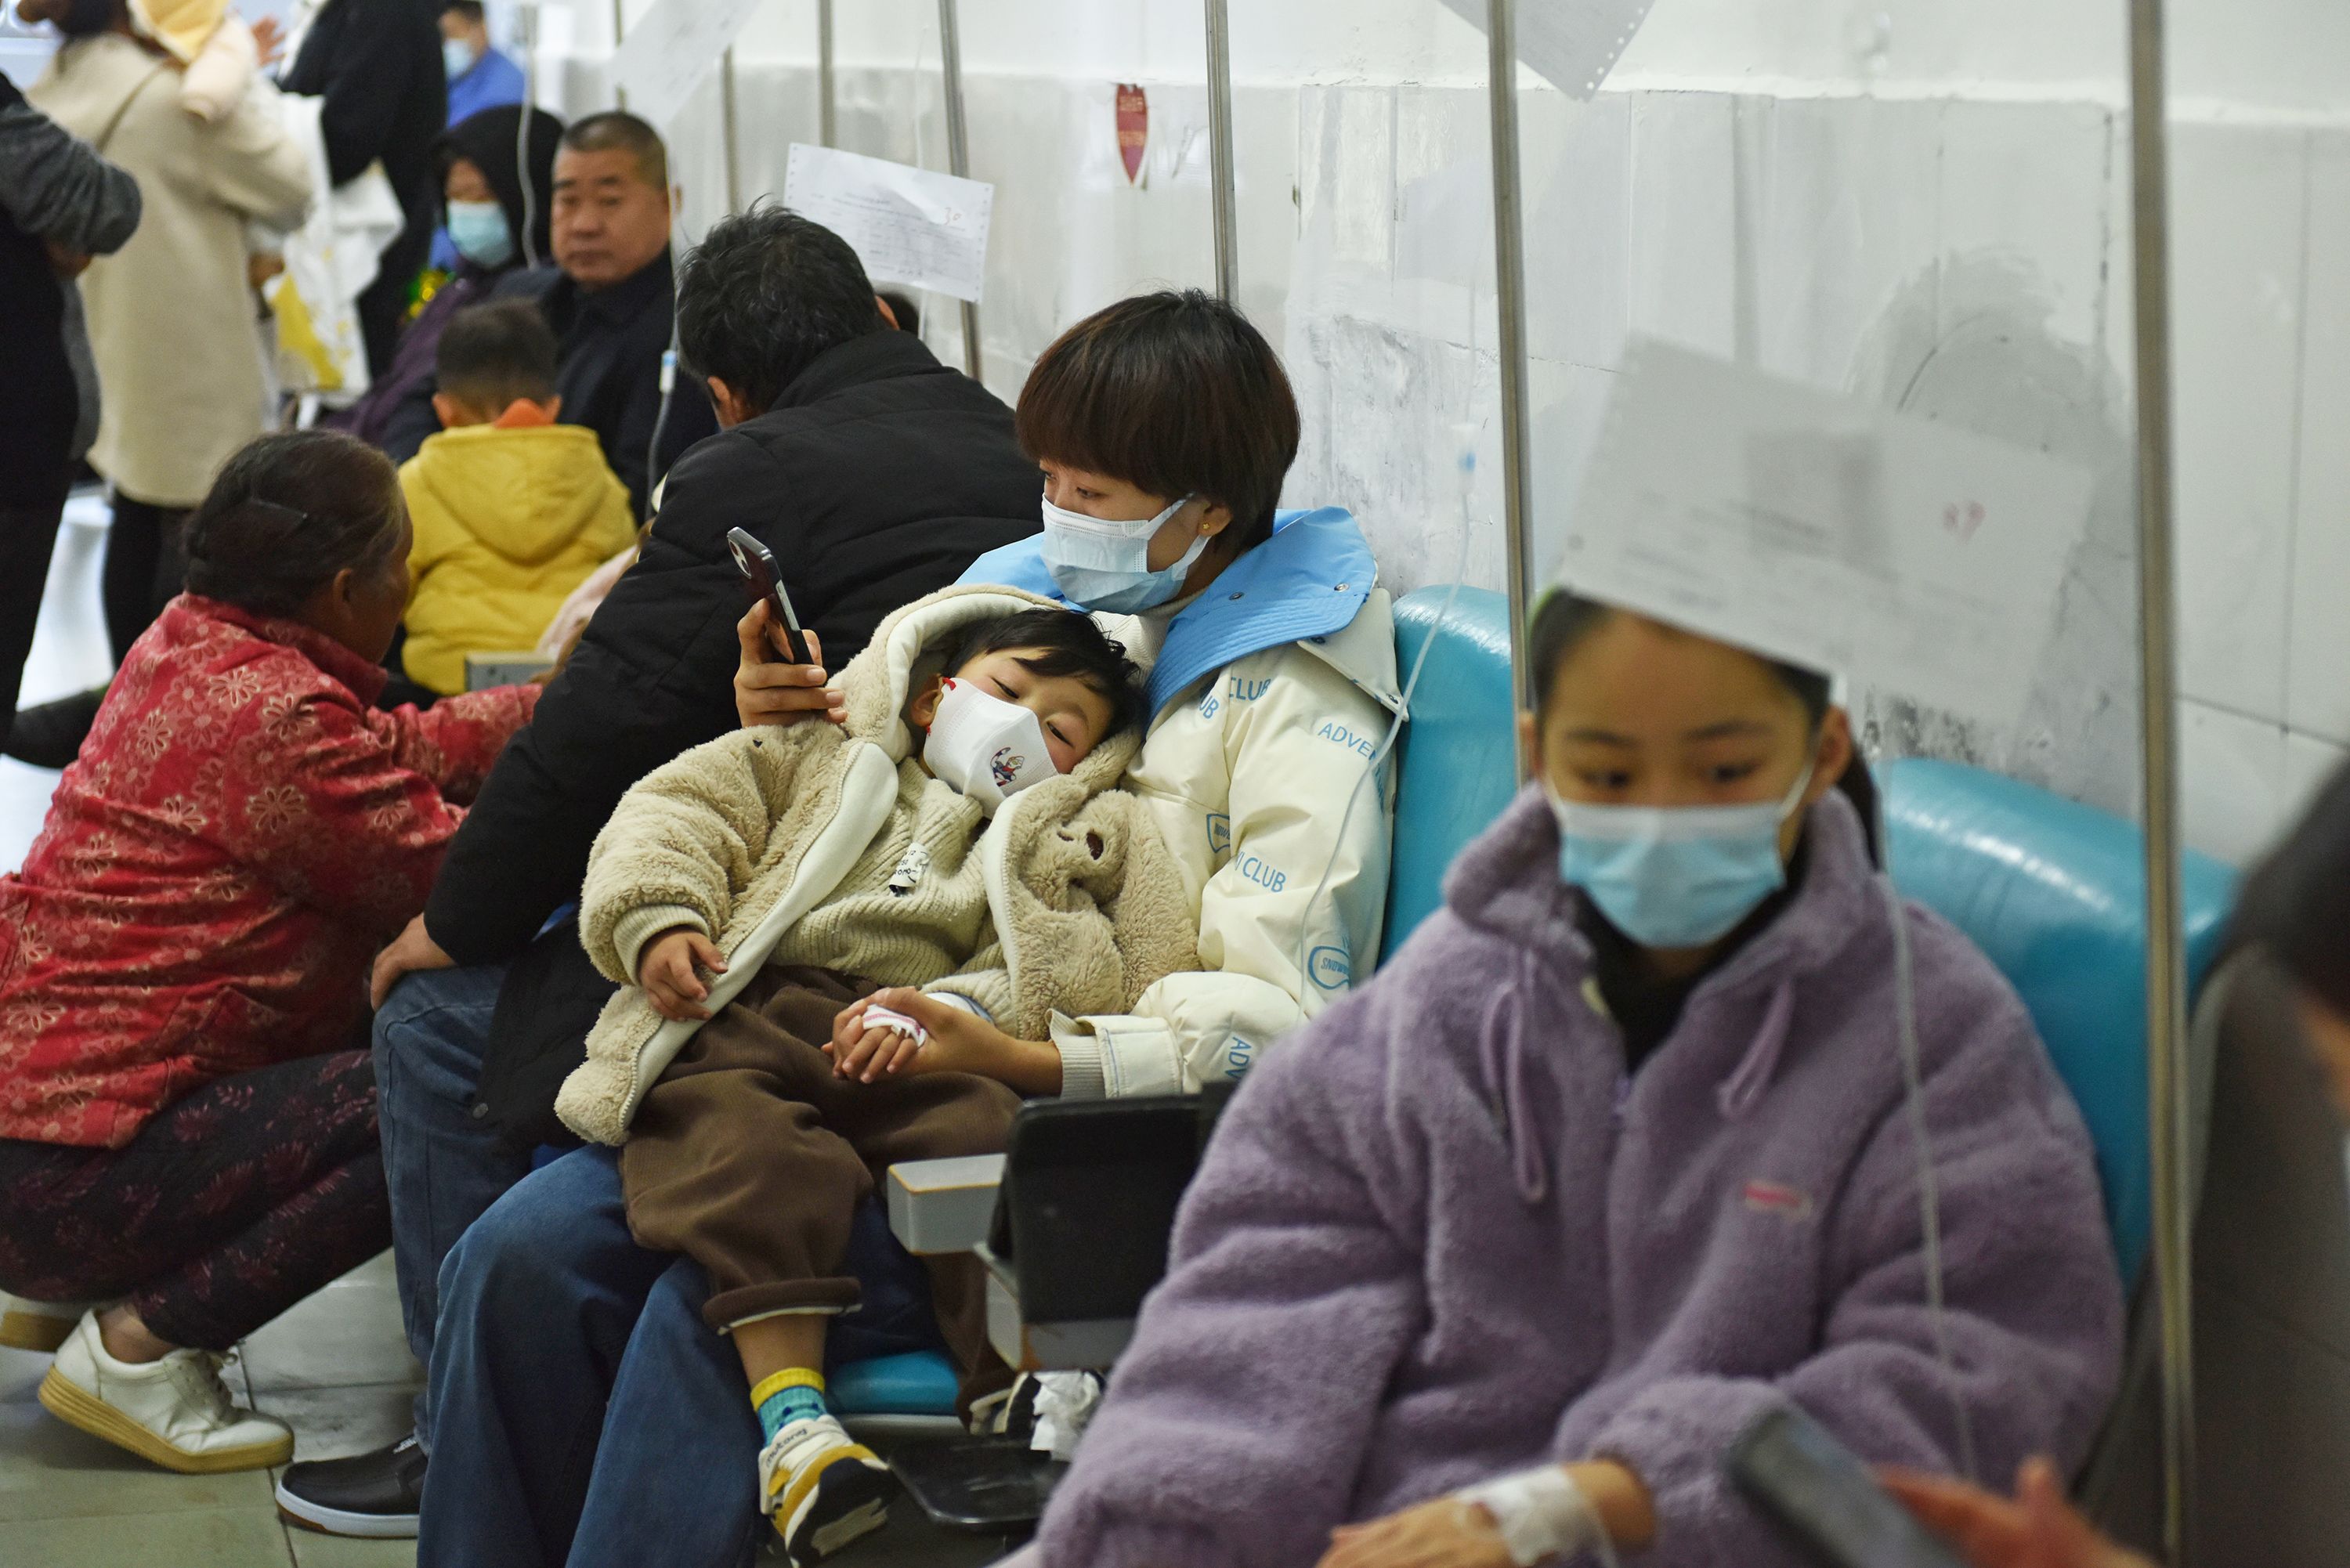 How concerning is the spike in respiratory illnesses in China? A doctor explains - CNN